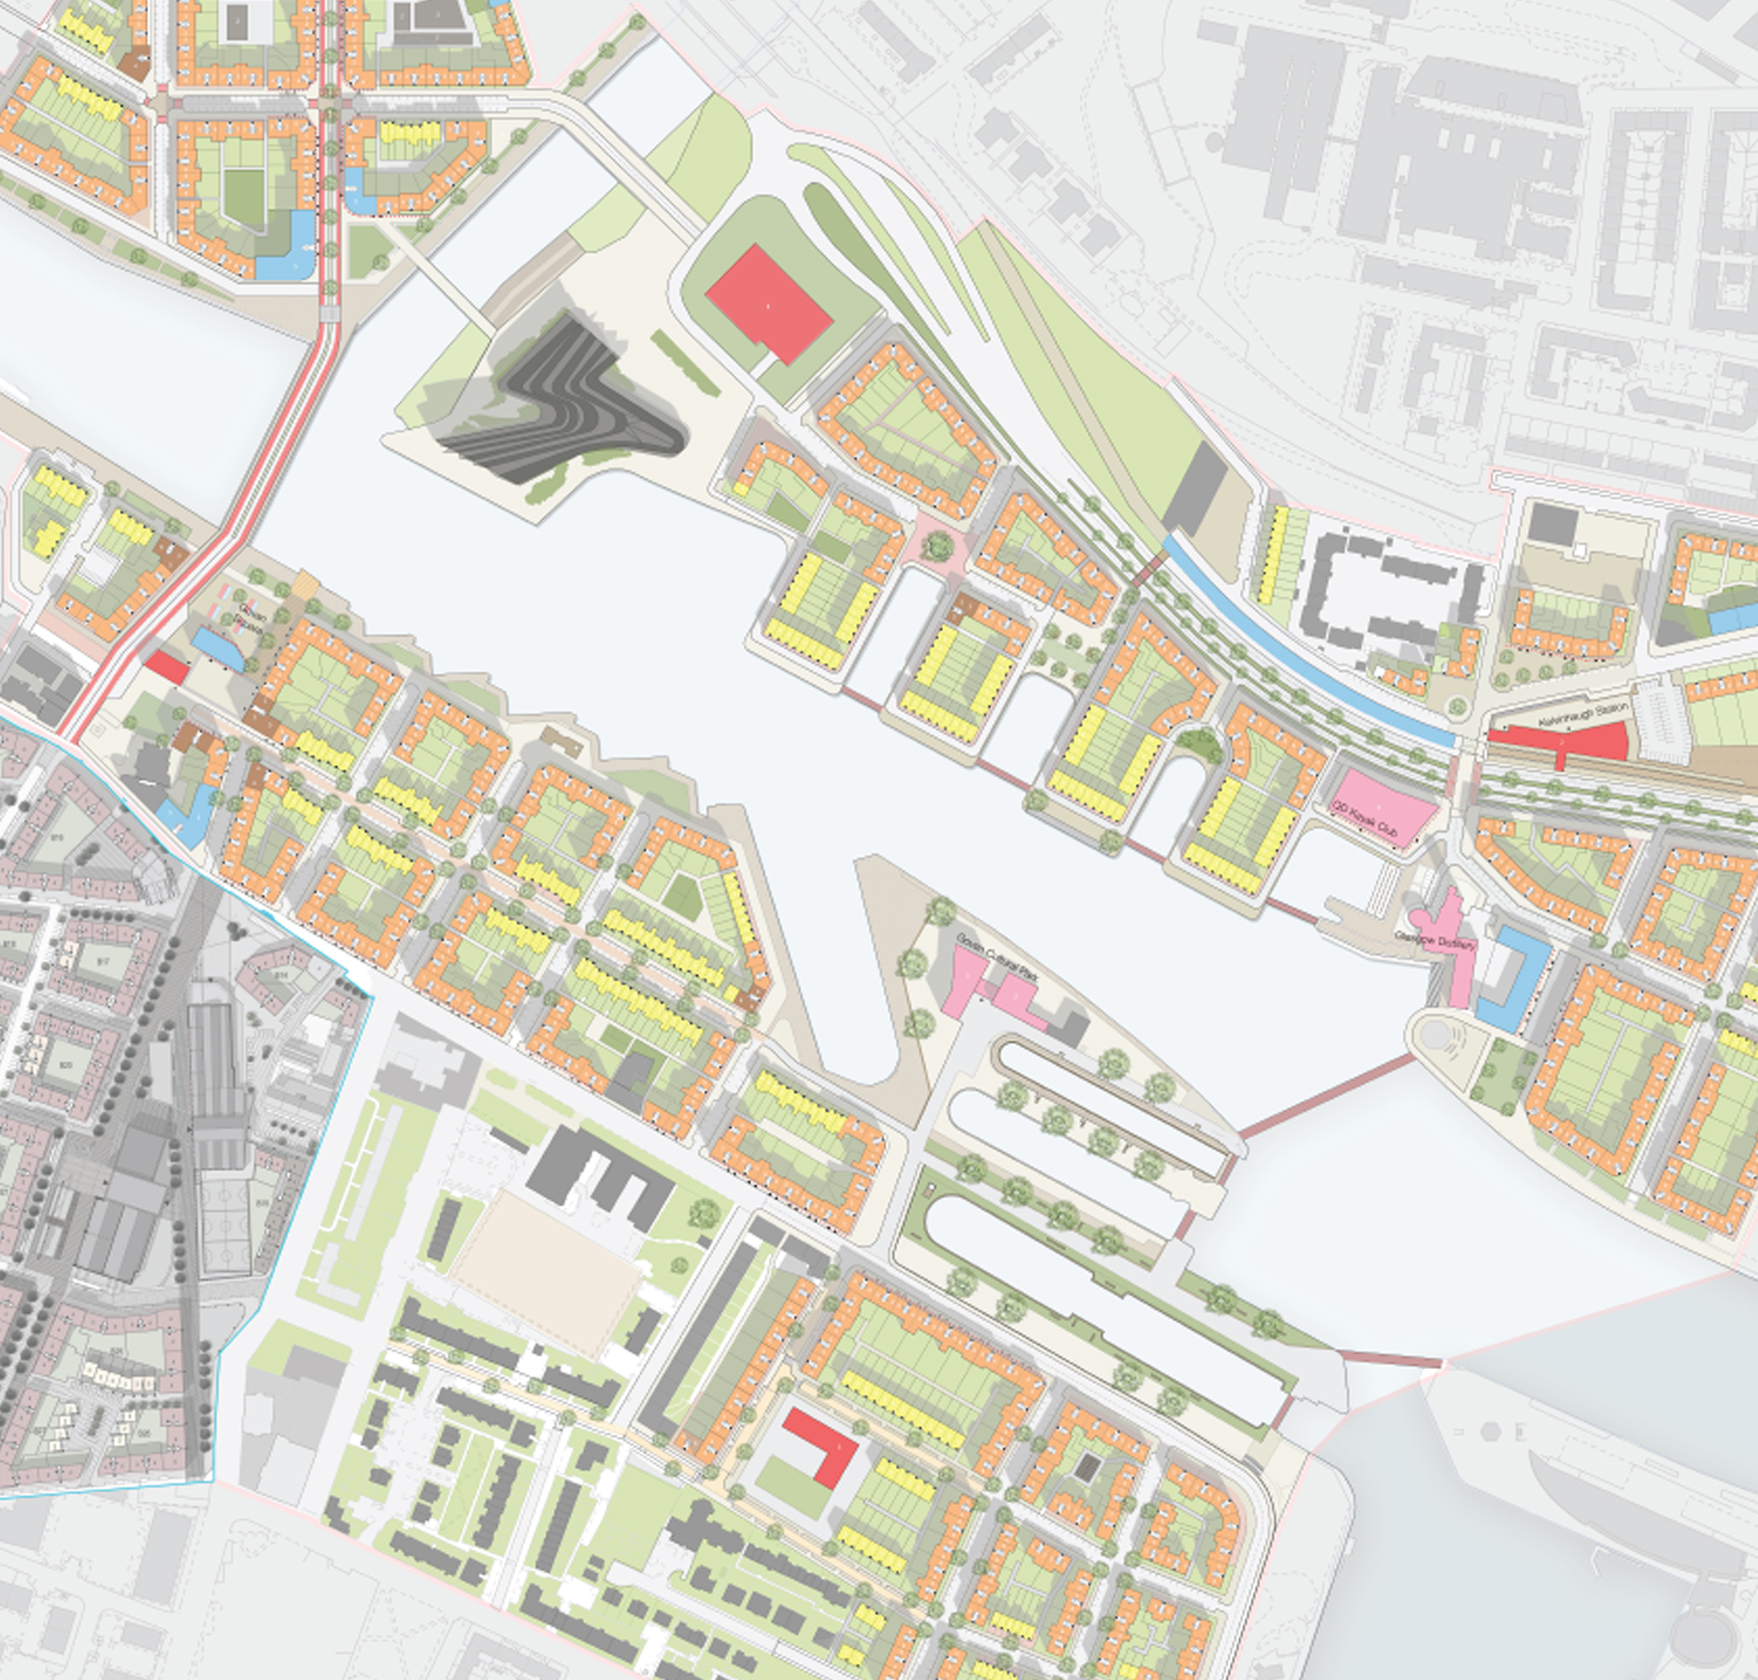 Future Glasgow: “Transforming the Clyde Waterfront” Masterplan